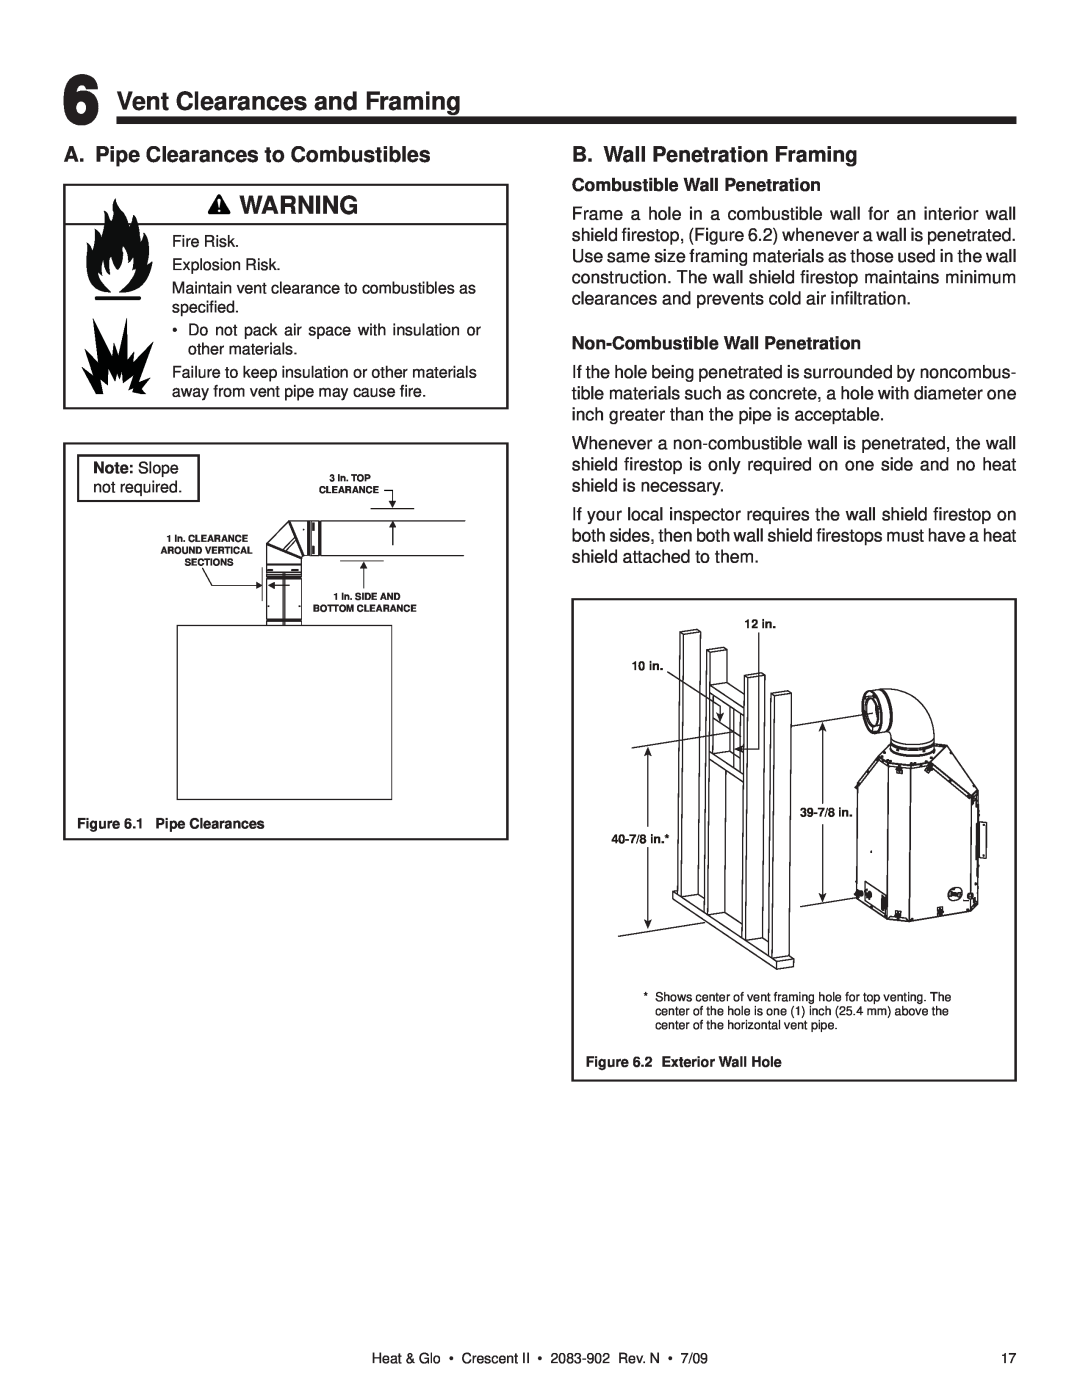 Heat & Glo LifeStyle CRESCENT II owner manual Vent Clearances and Framing, A. Pipe Clearances to Combustibles 